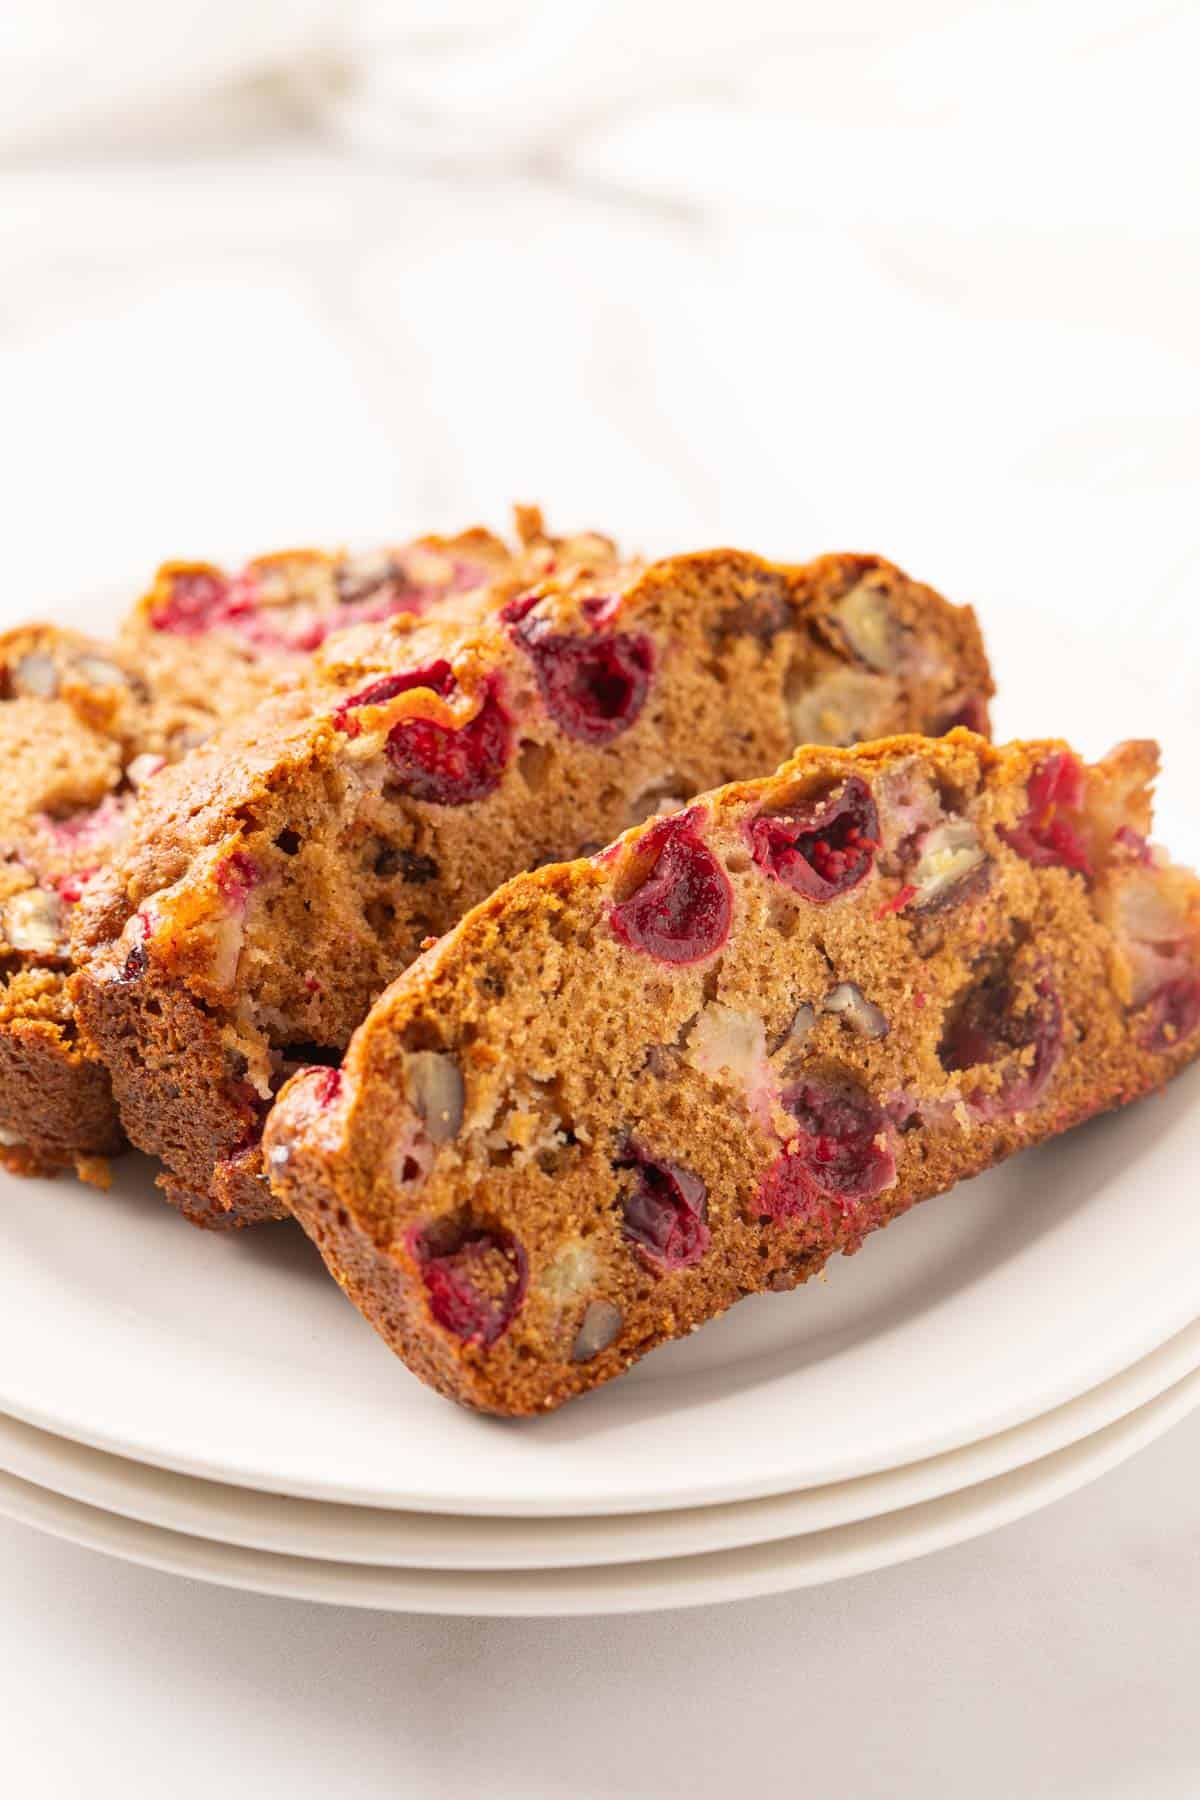 Three slices of cranberry apple bread on a small white plate.